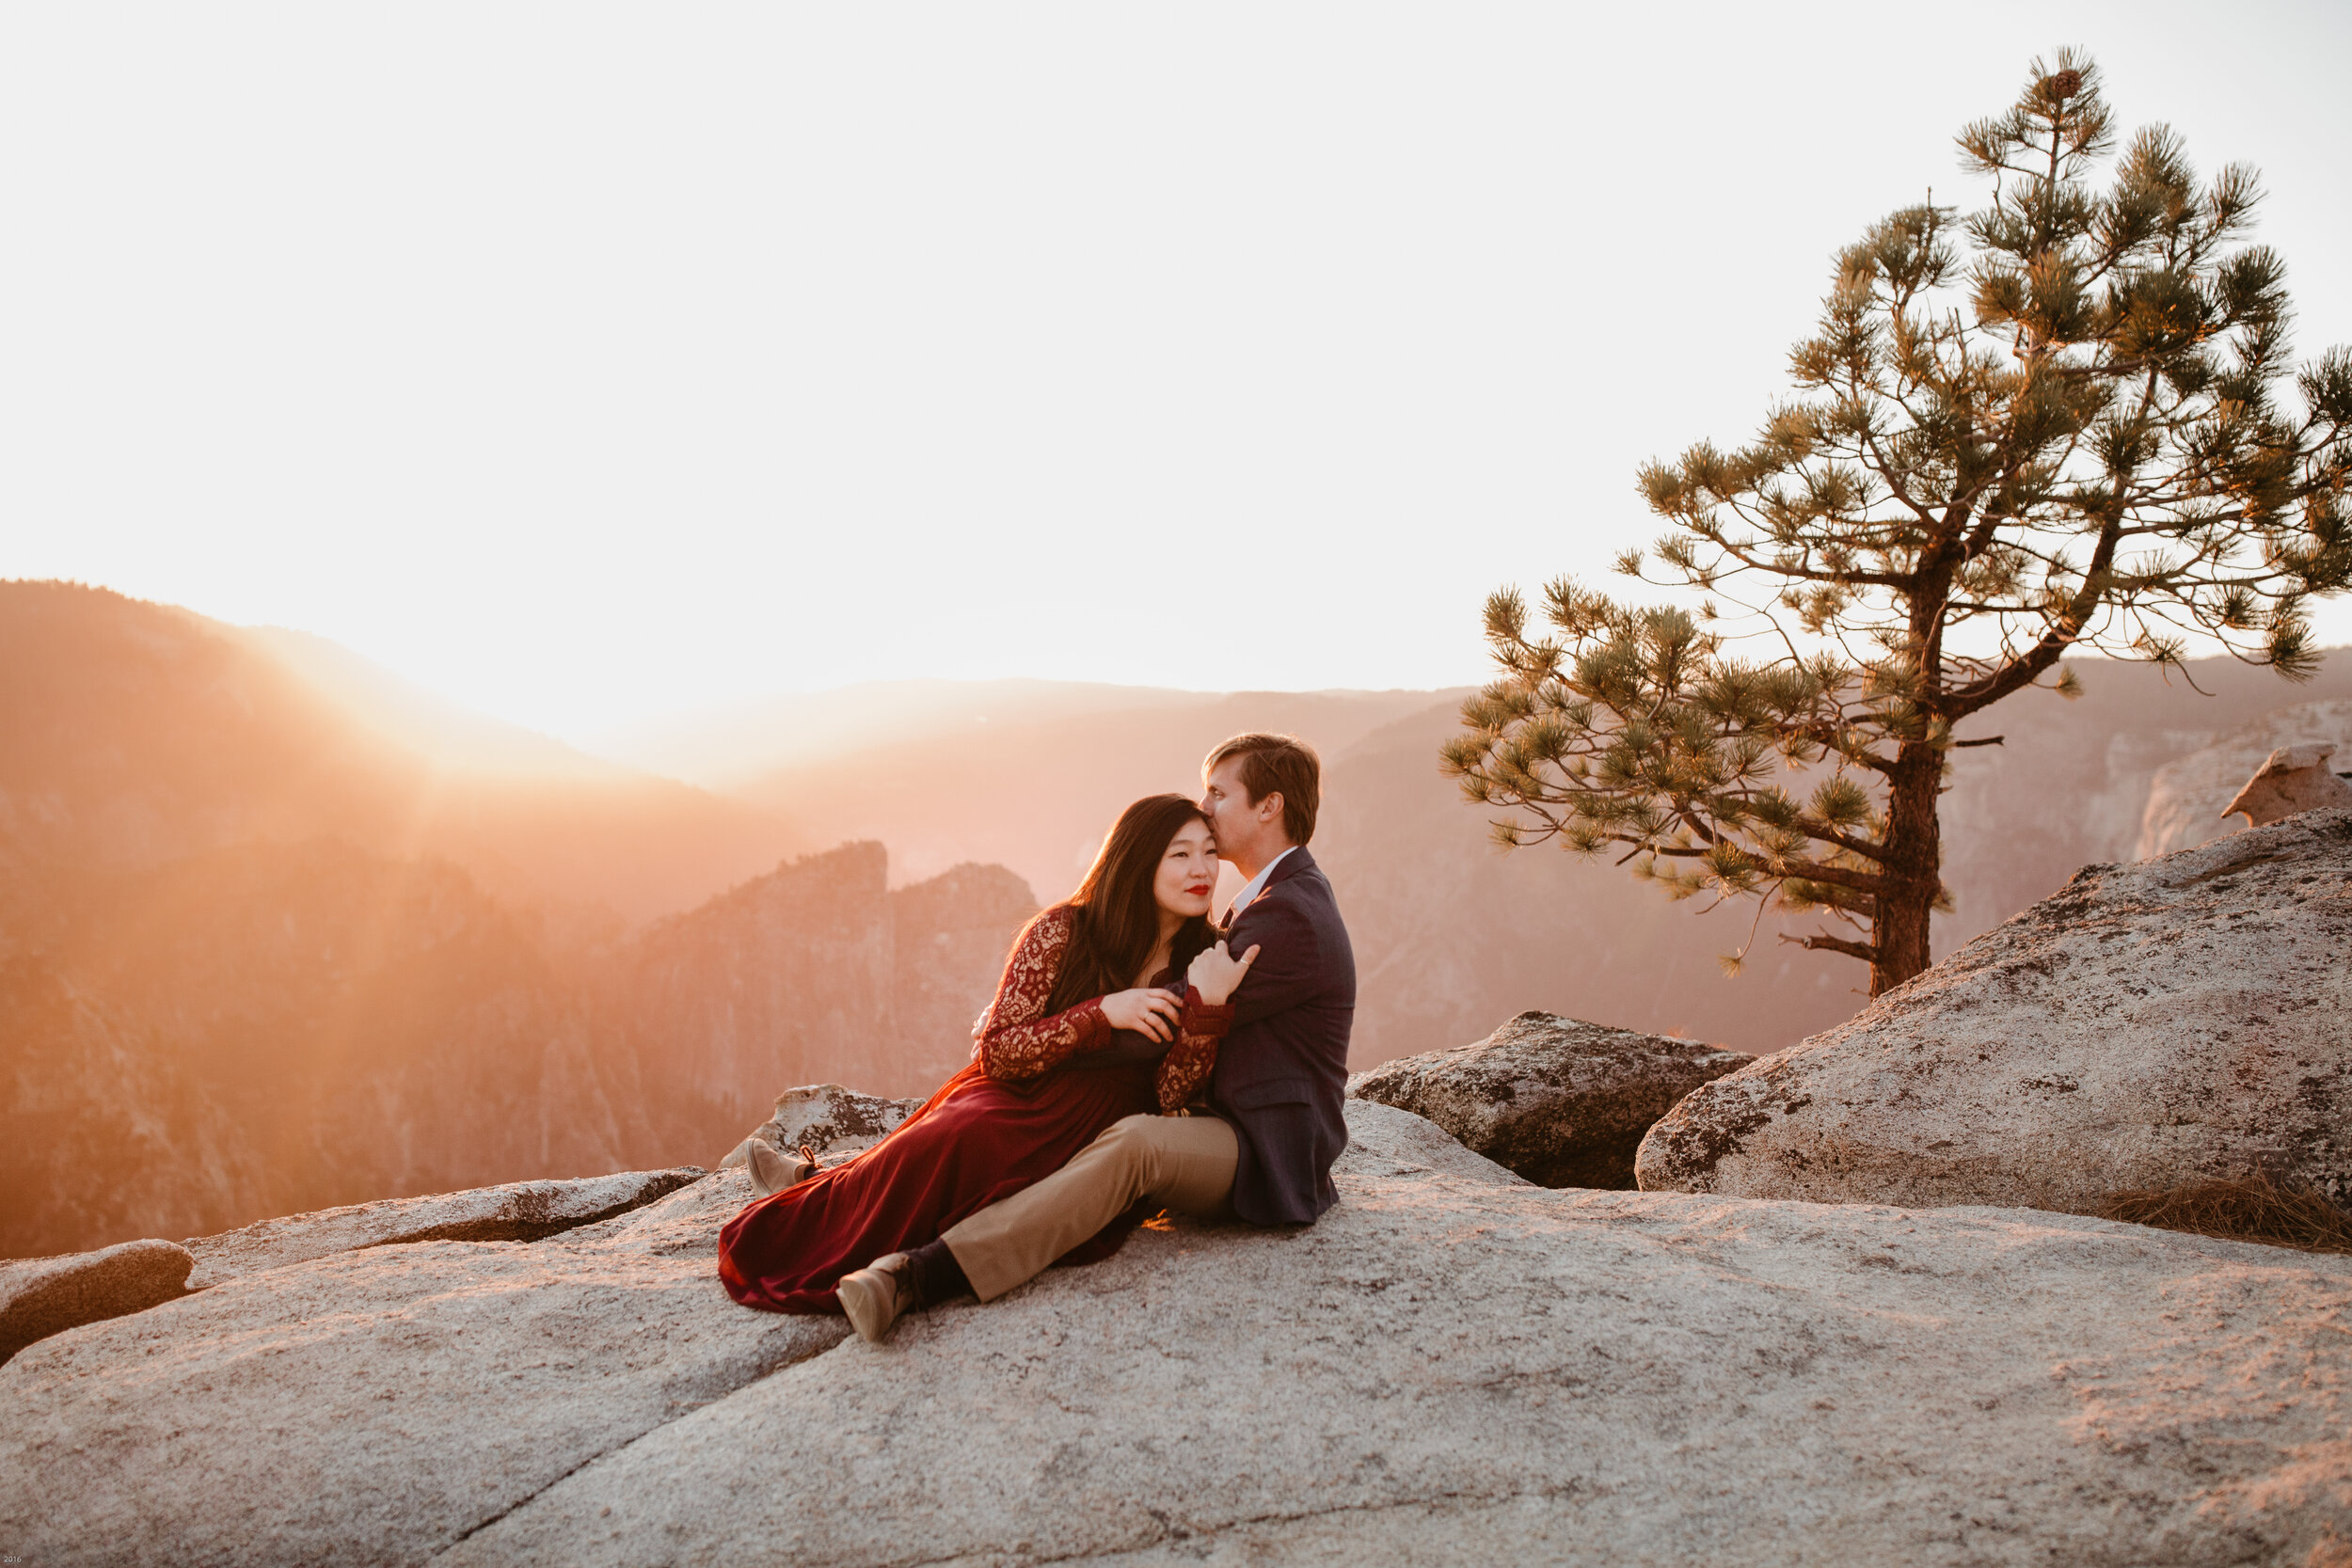 yosemite-national-park-couples-session-at-taft-point-and-yosemite-valley-yosemite-elopement-photographer-nicole-daacke-photography-159.jpg